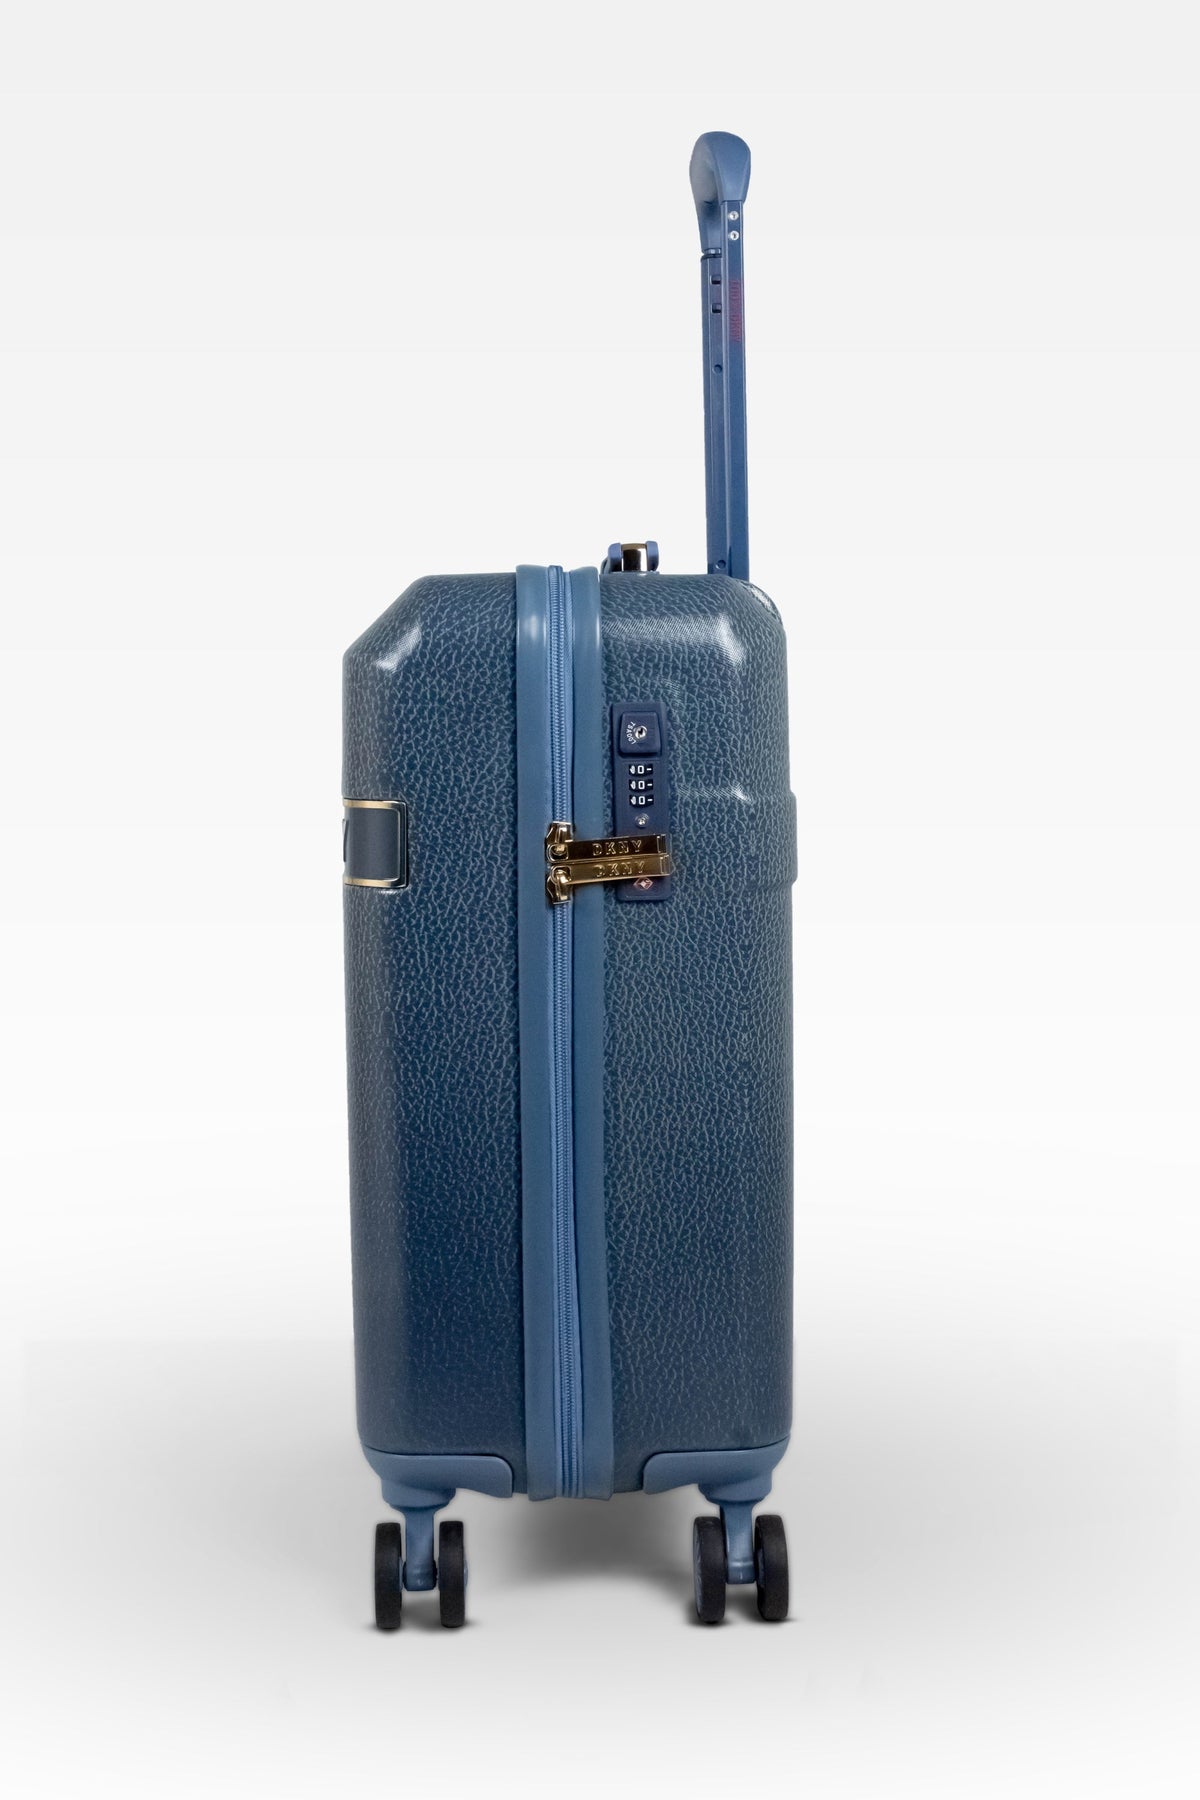 DKNY RAPTURE Range Colonial Blue Color Hard Luggage – Trunk House India